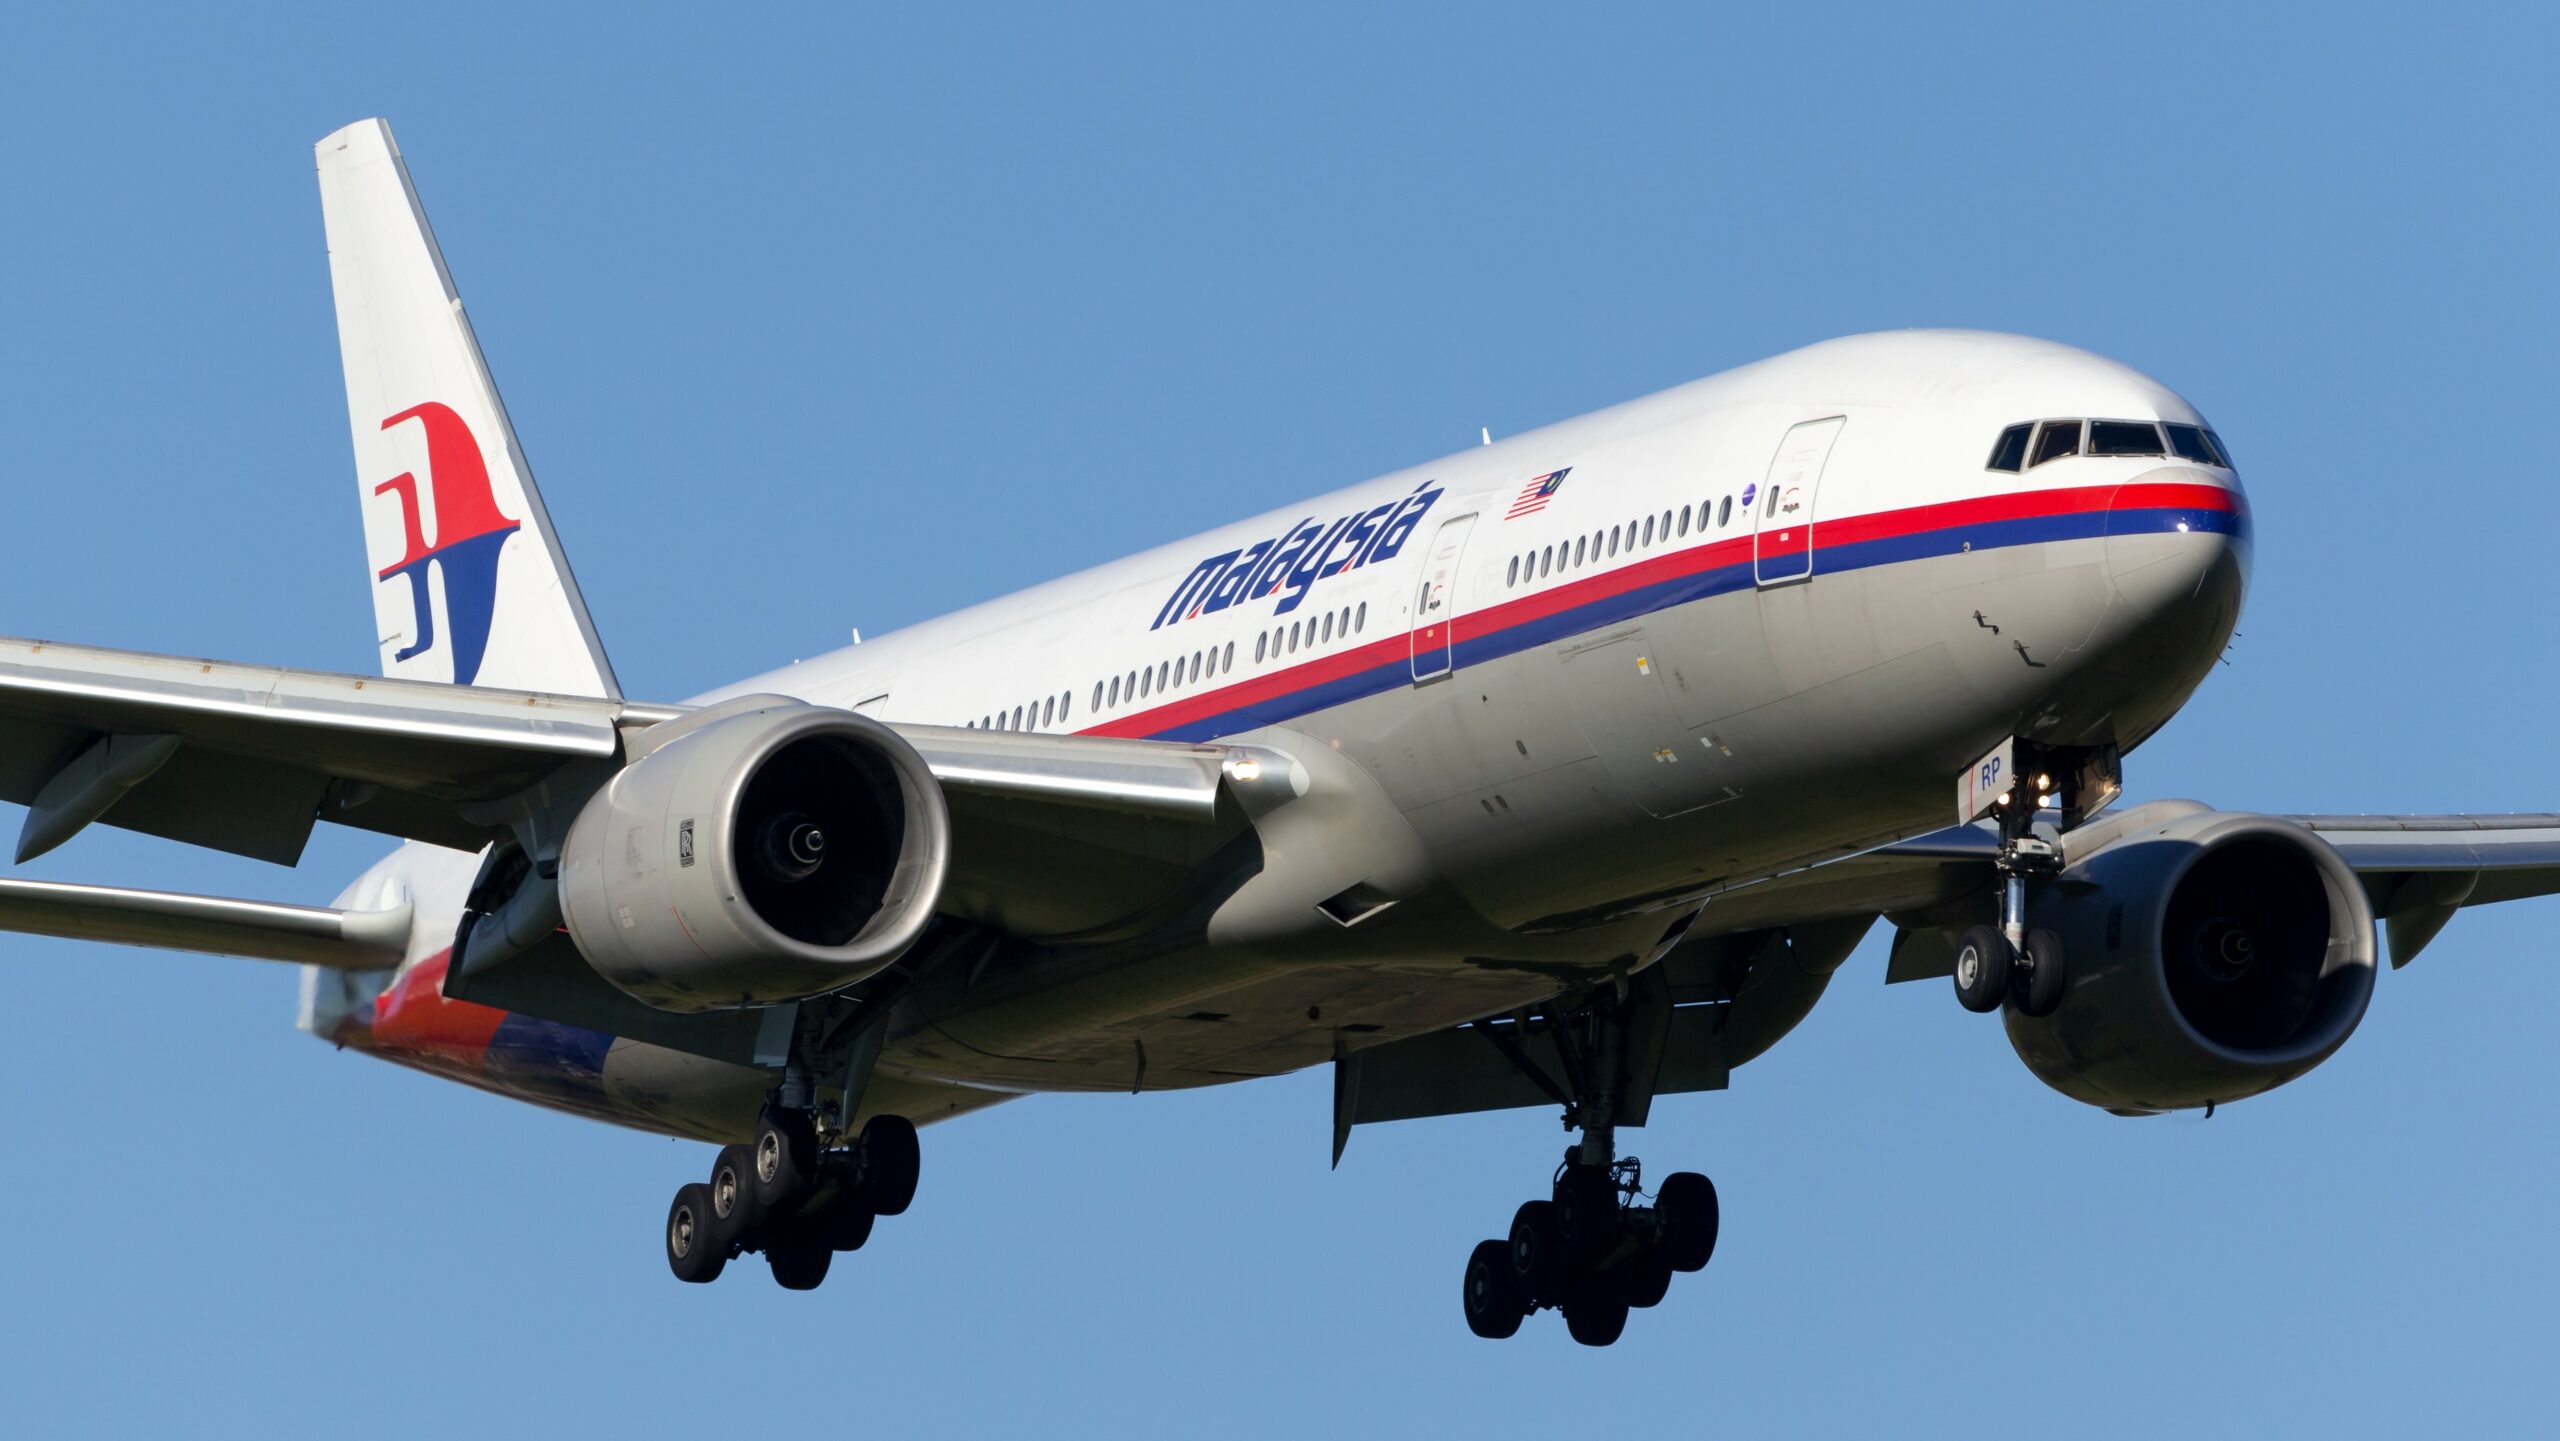 Malaysia Airlines looking for RM 16 billion to fight the losses due to Covid-19 1